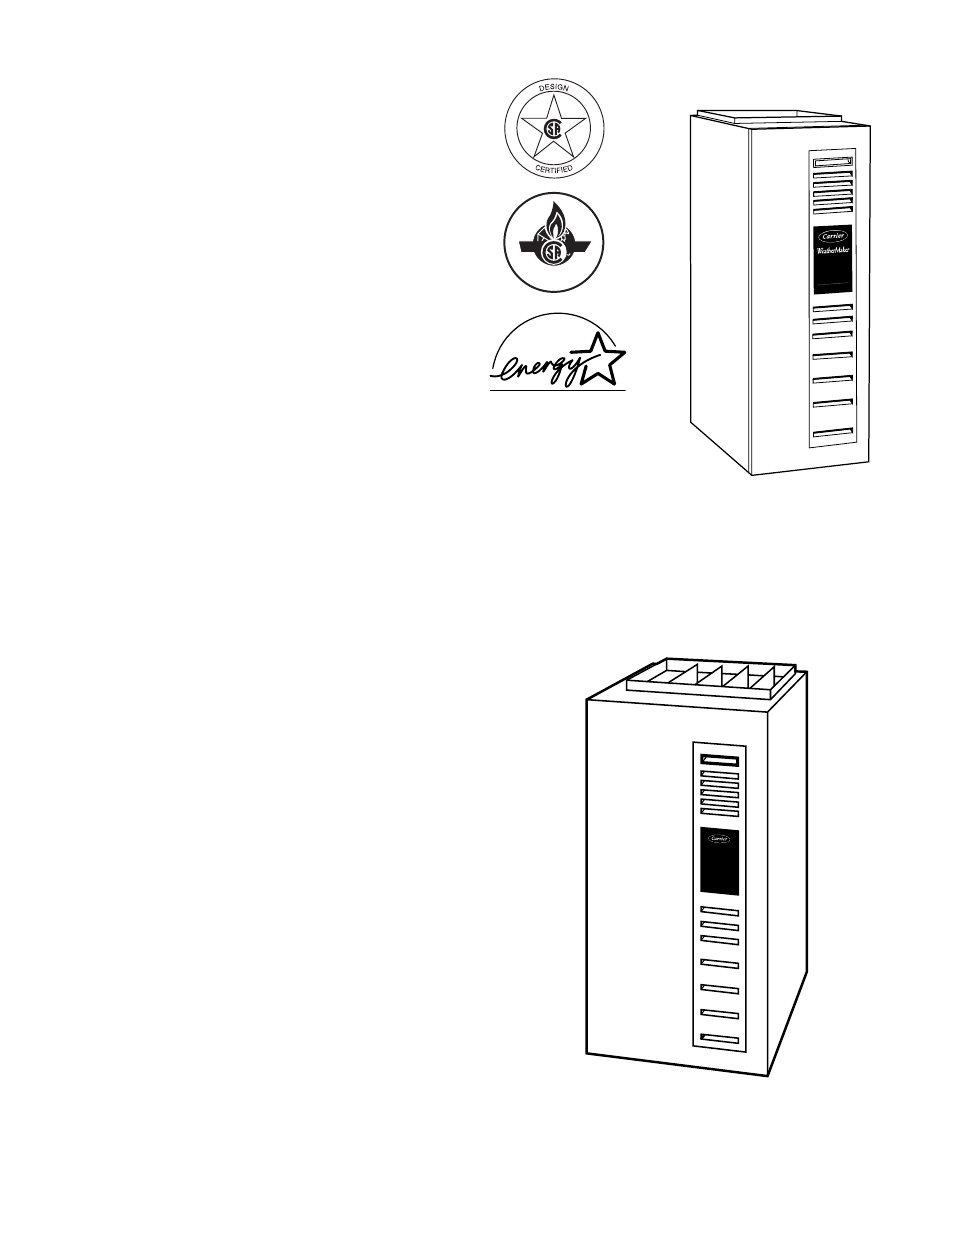 Carrier 58MTA User Manual | Page 2 / 12 | Also for: 58MXA, 58MCA, 58MVP